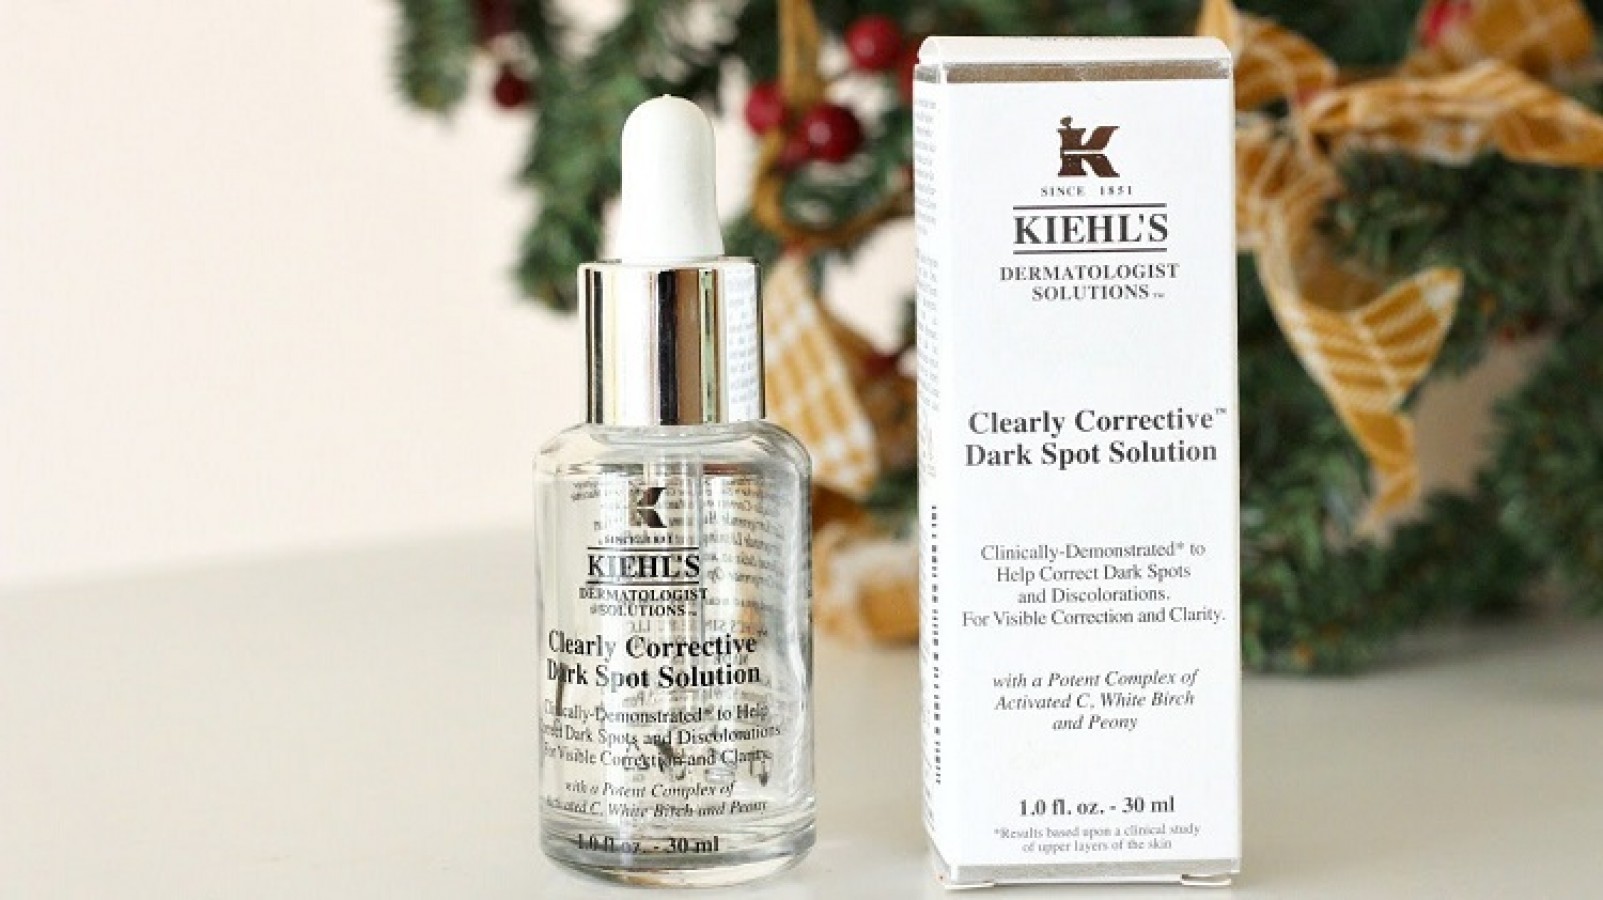 Tinh Chất Kiehl's Clearly Corrective Dark Spot Solution